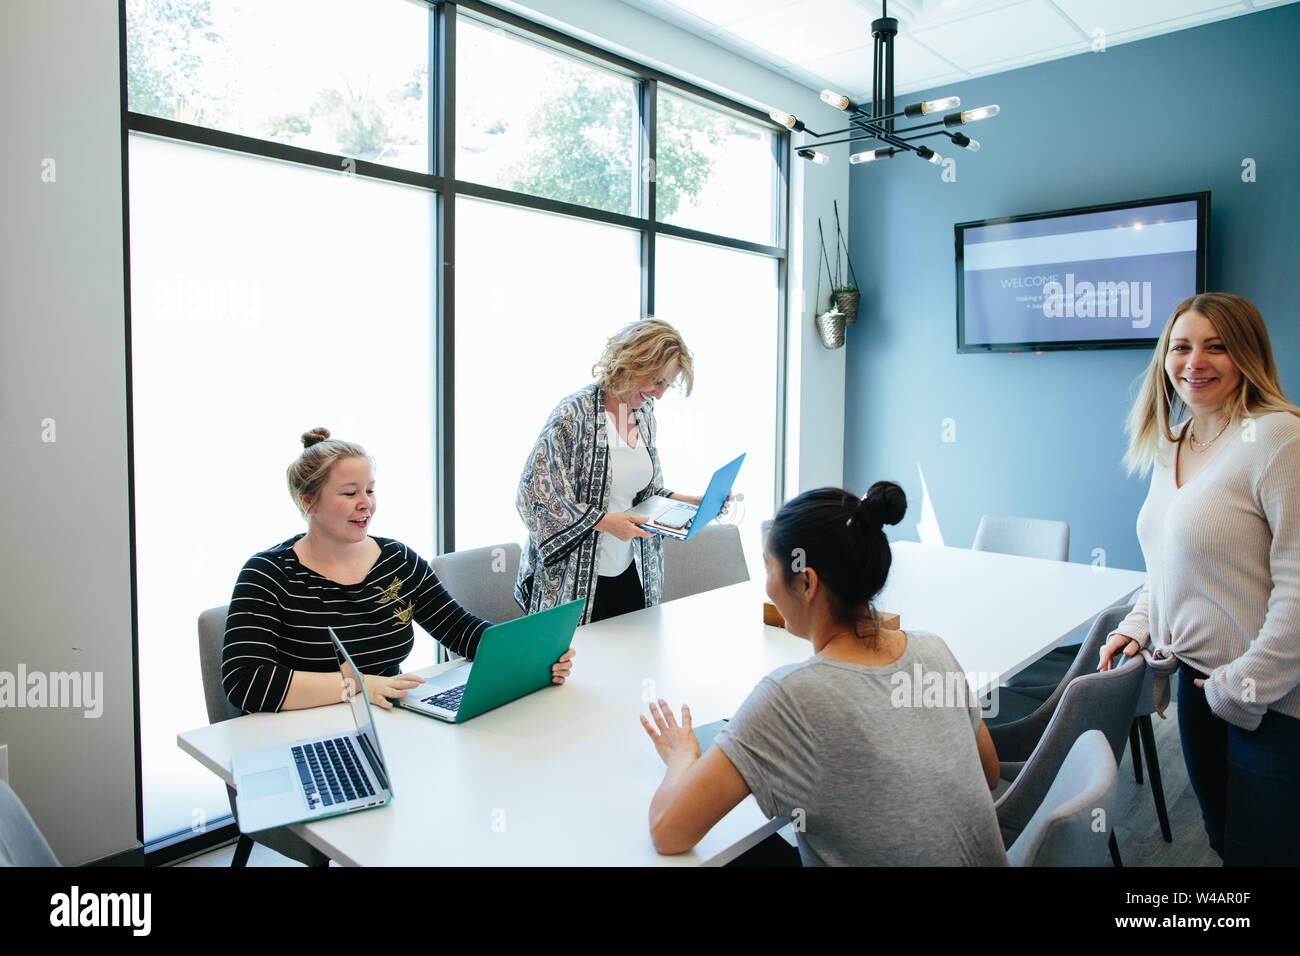 Women smiling wrap up their meeting in a conference room Stock Photo